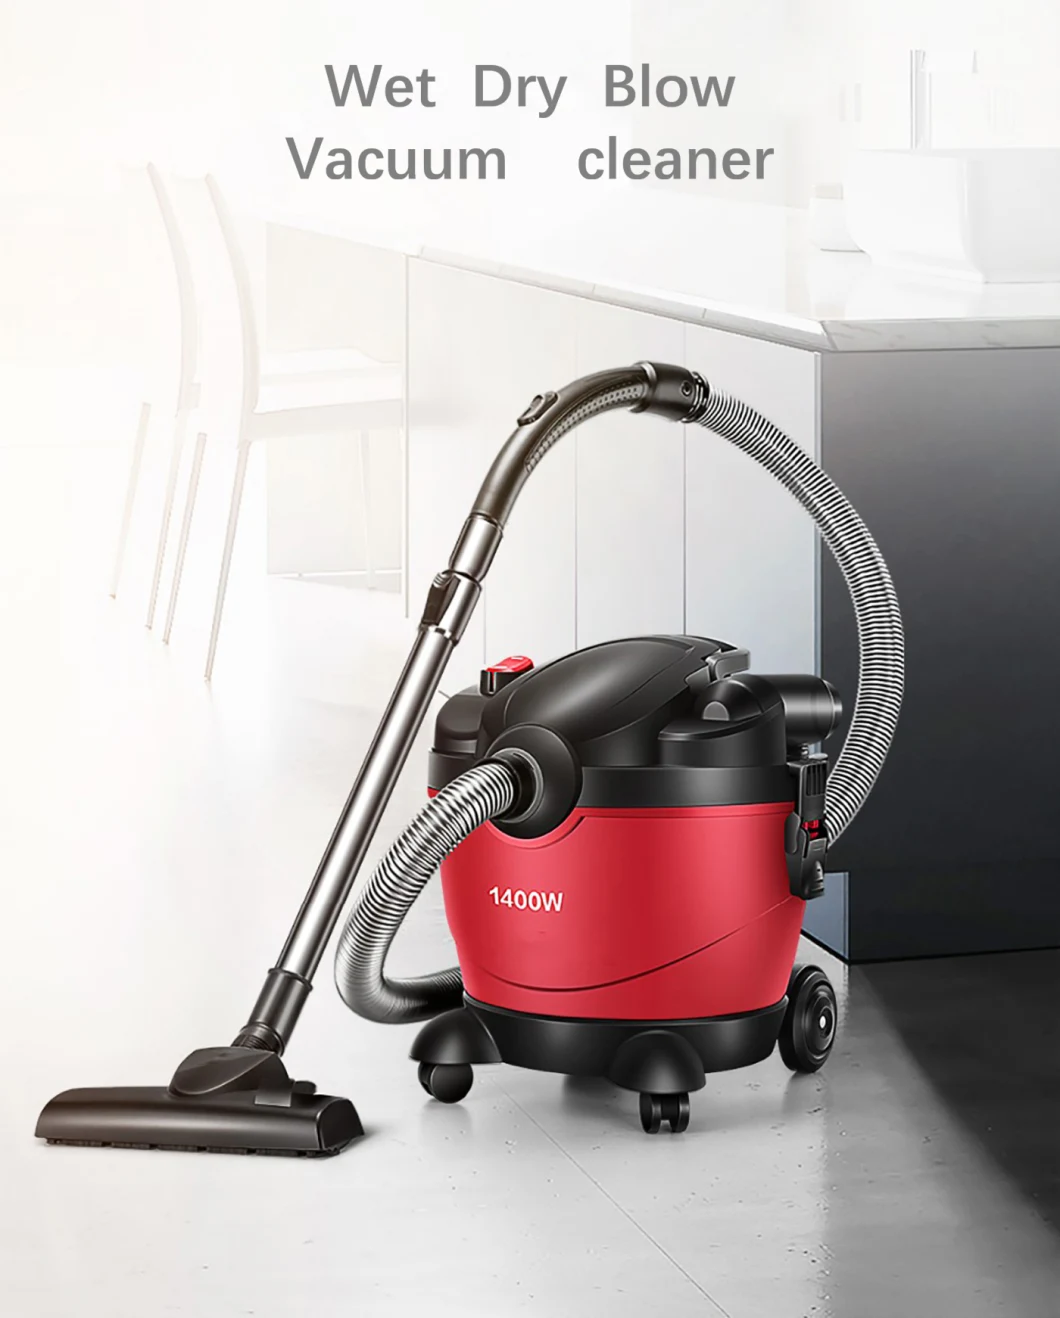 Most Popular Products of 2021 Cyclone Vacuum Cleaners, Upright Cordless Vacuum Cleaner